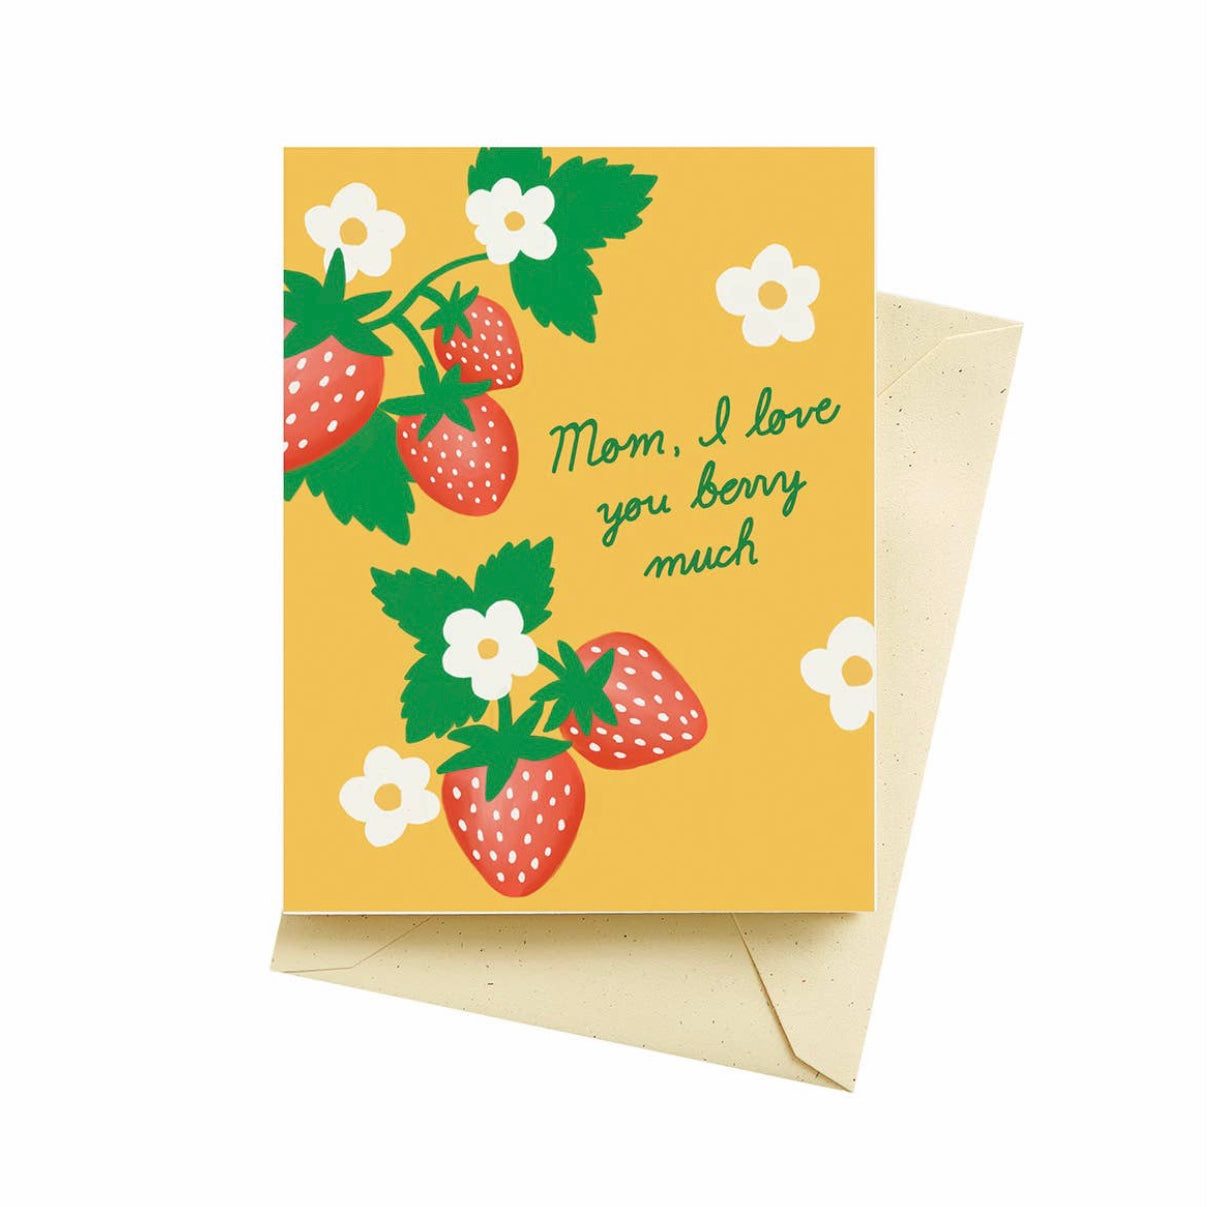 Mom I love you berry much greeting card